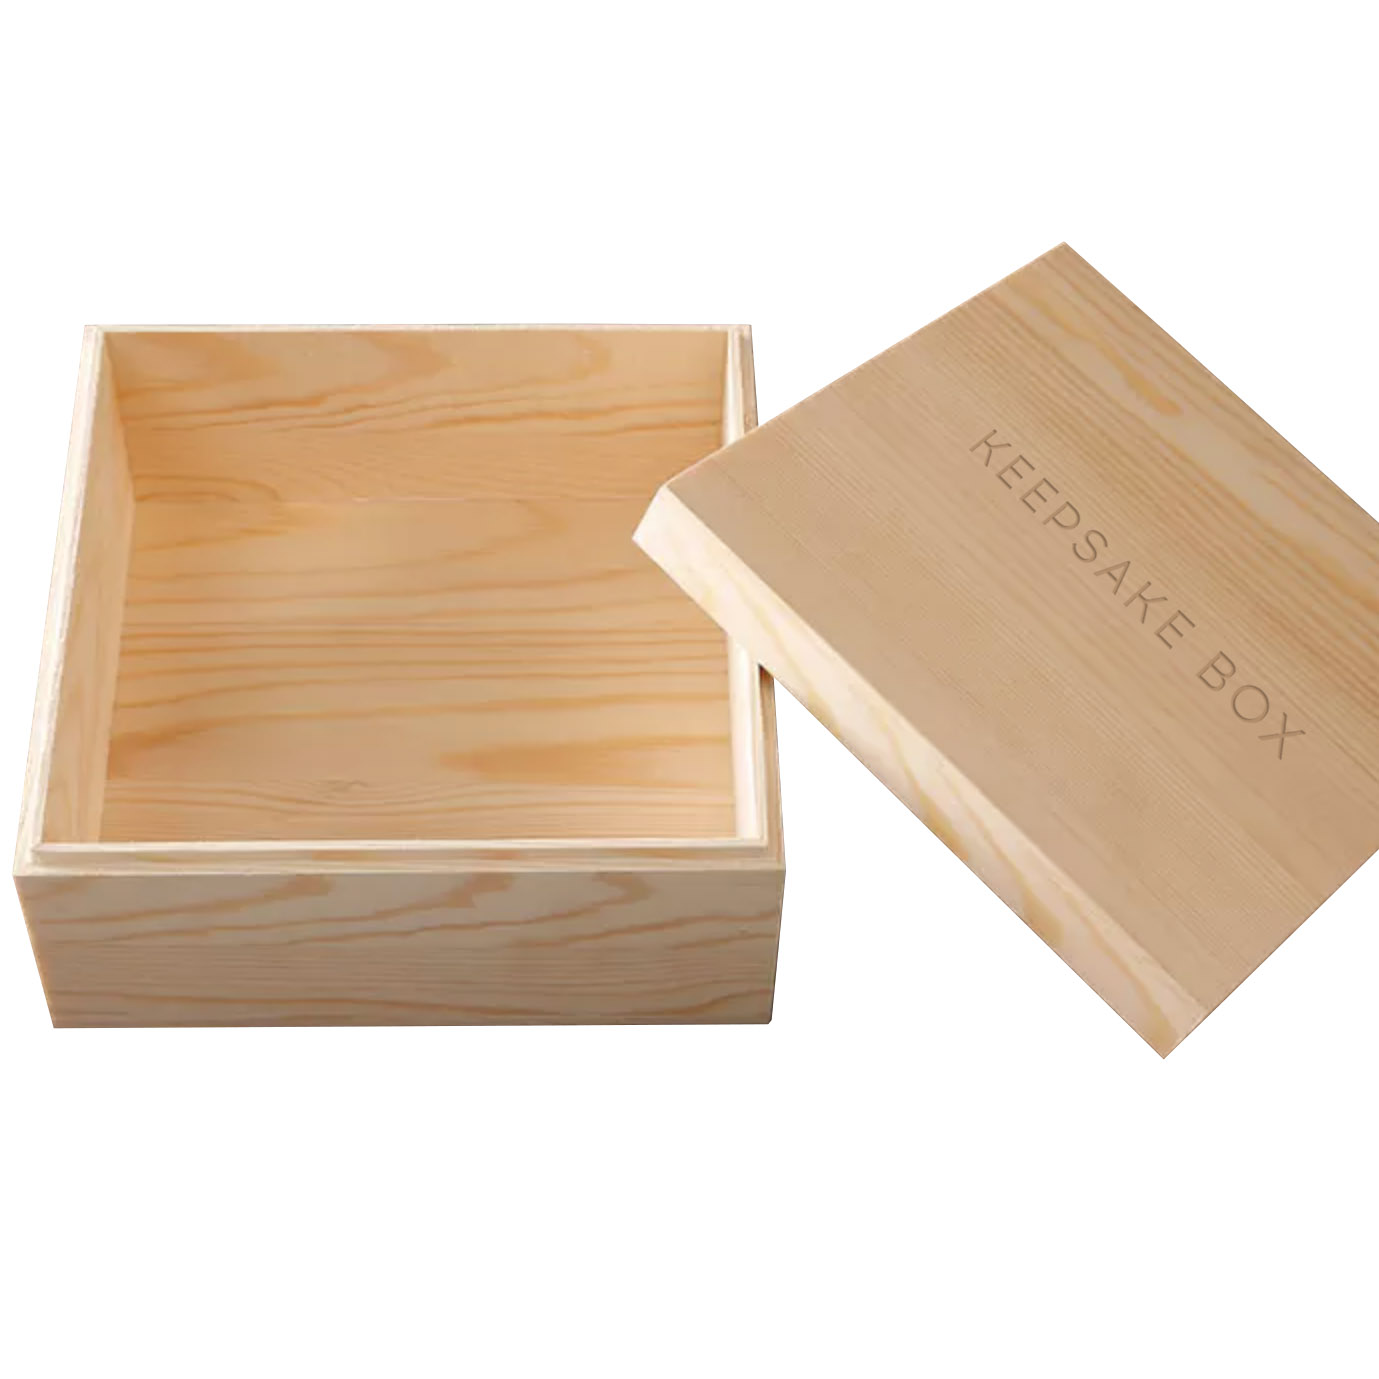 Wooden Box with Lid